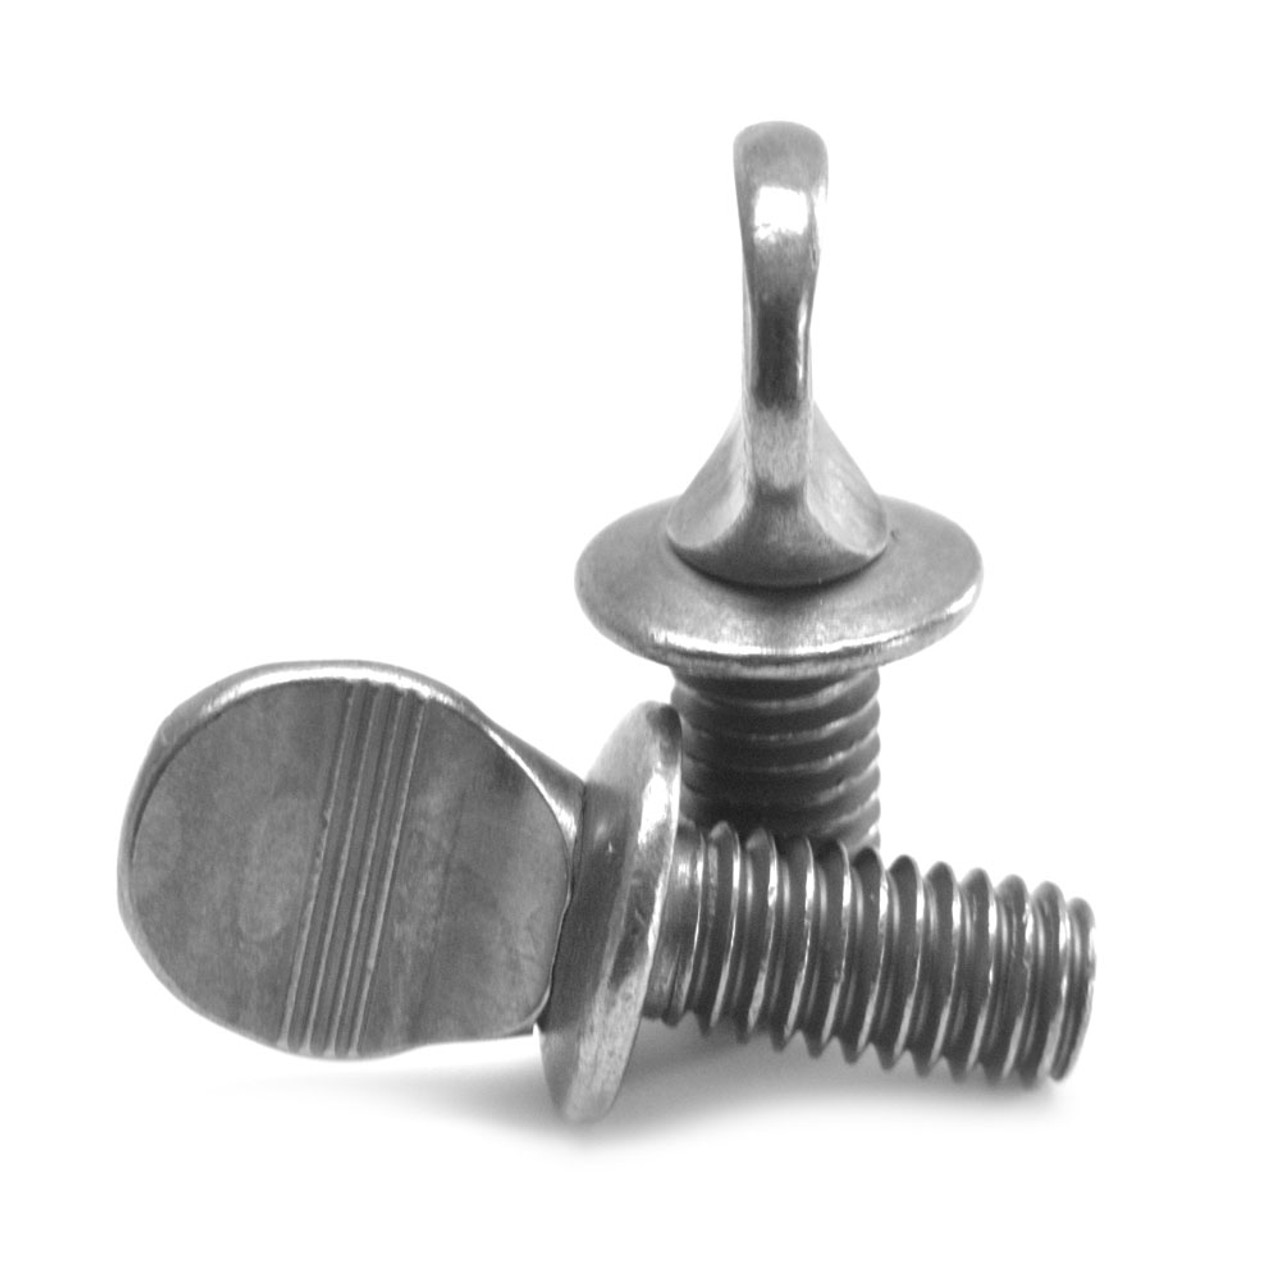 5/16-18 x 1 Coarse Thread Thumb Screw Type A With Shoulder Low Carbon Steel Plain Finish